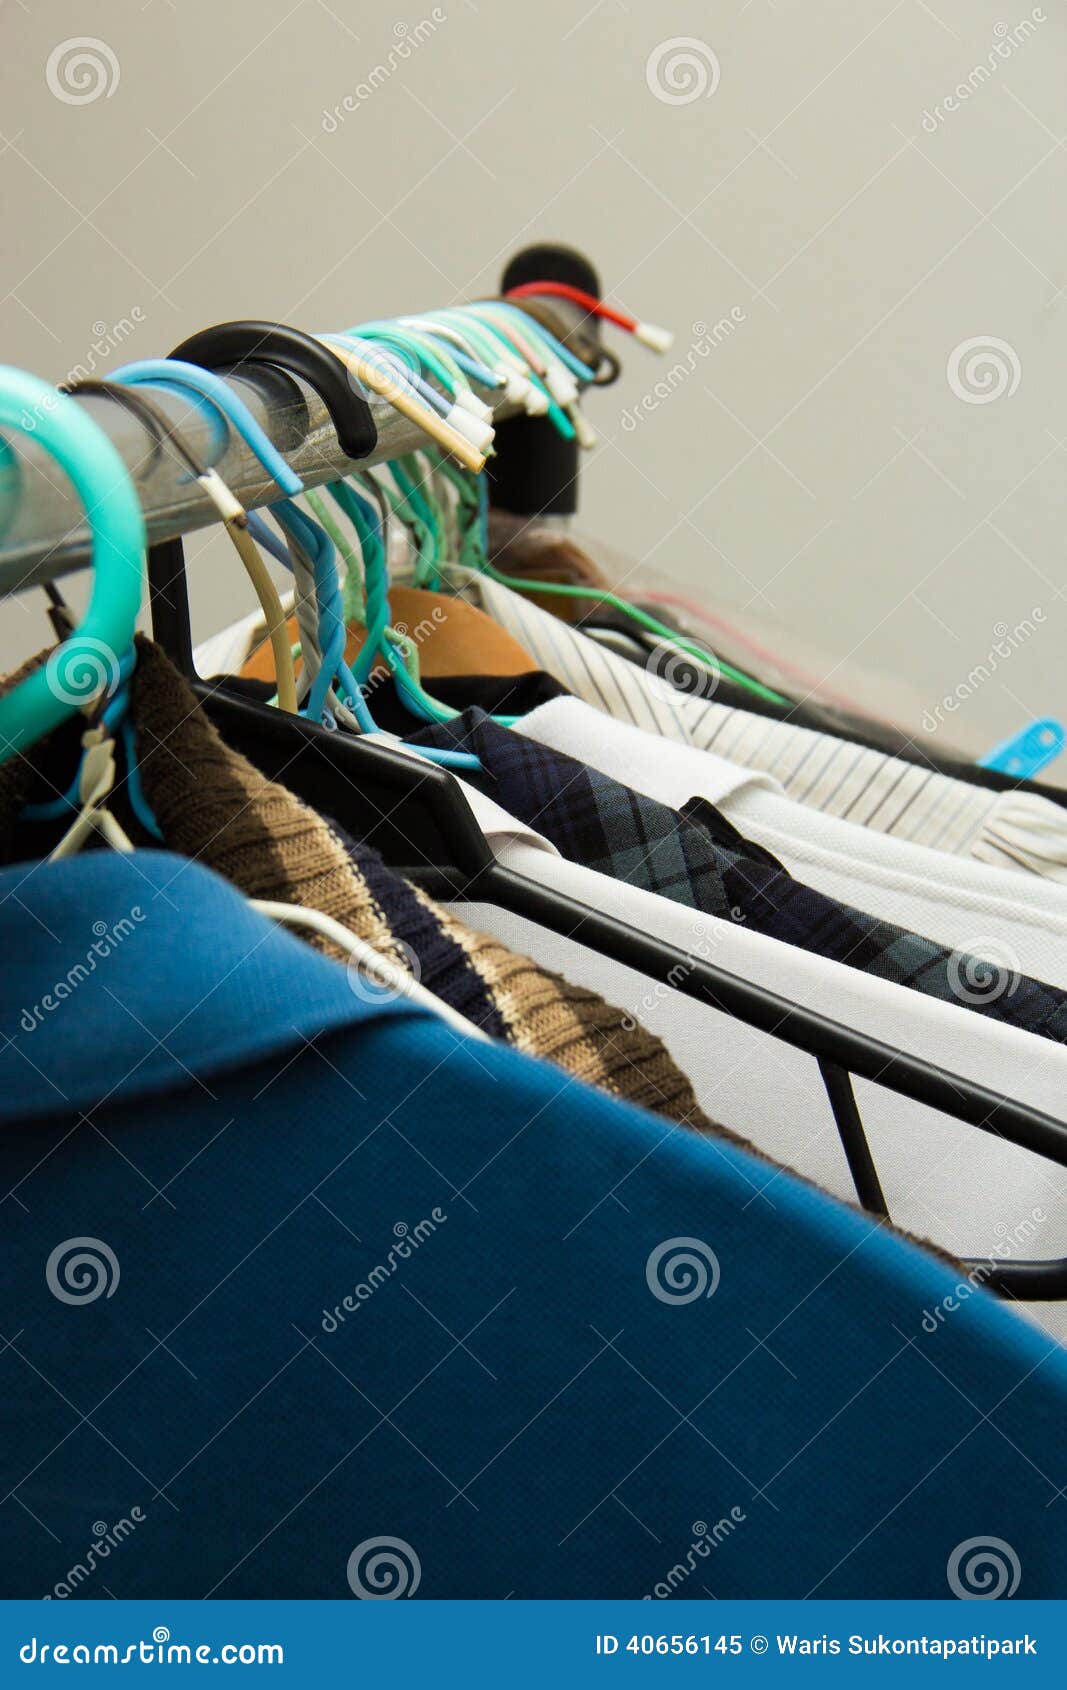 Various type of clothes stock image. Image of blue, fashion - 40656145